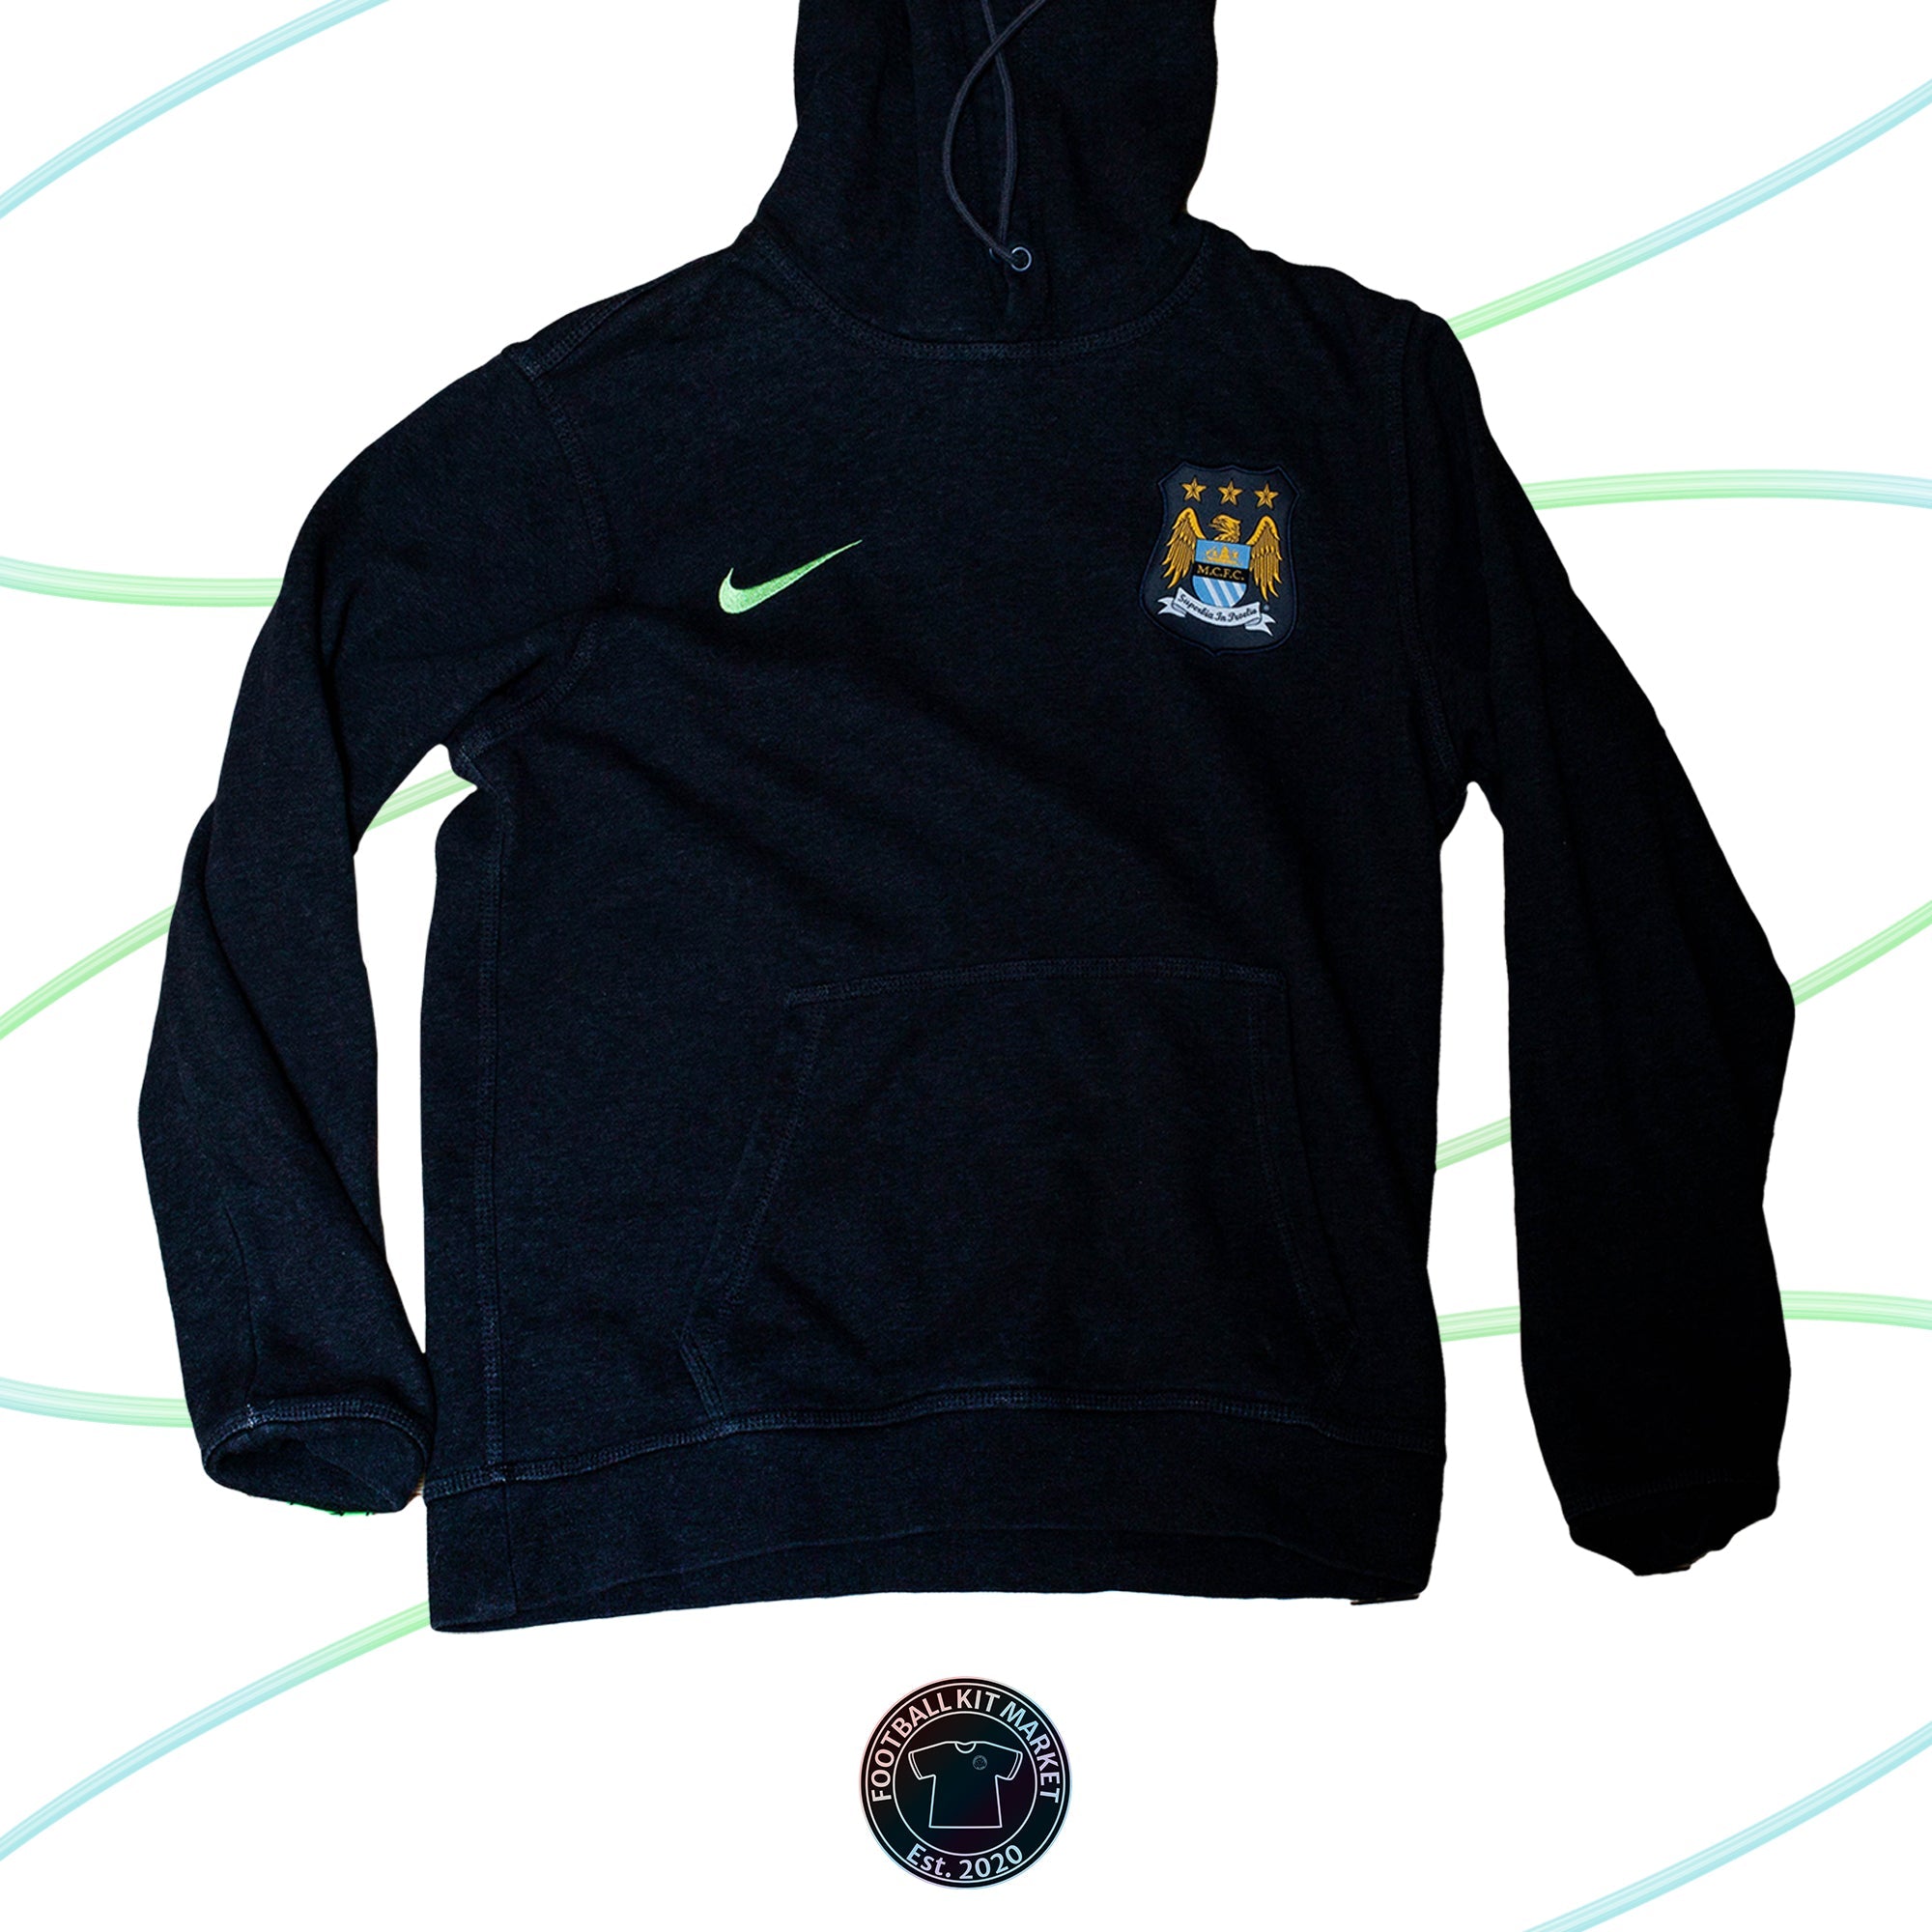 Genuine MANCHESTER CITY Hoodie - NIKE (M) - Product Image from Football Kit Market